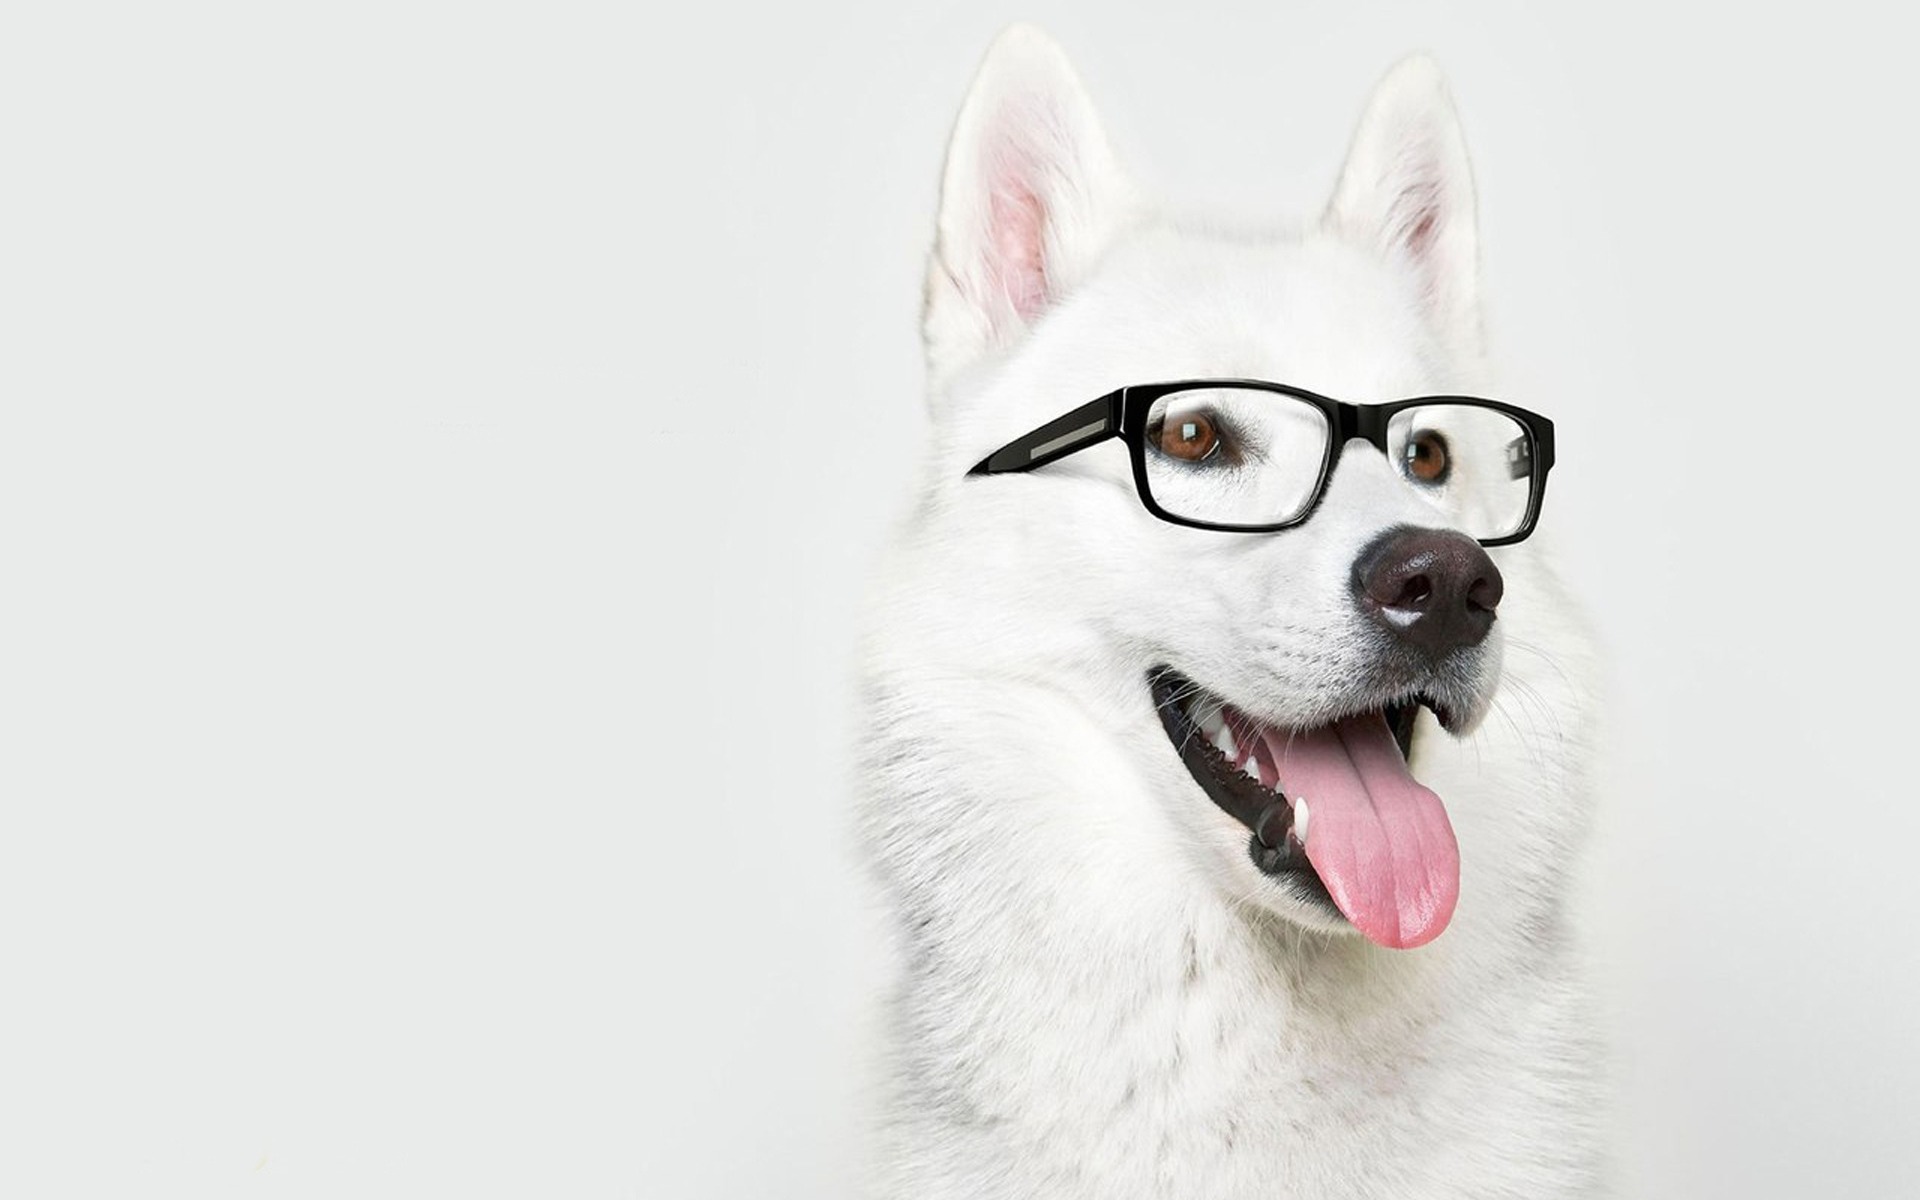 Dog With Glasses Wallpaper And Image Pictures Photos